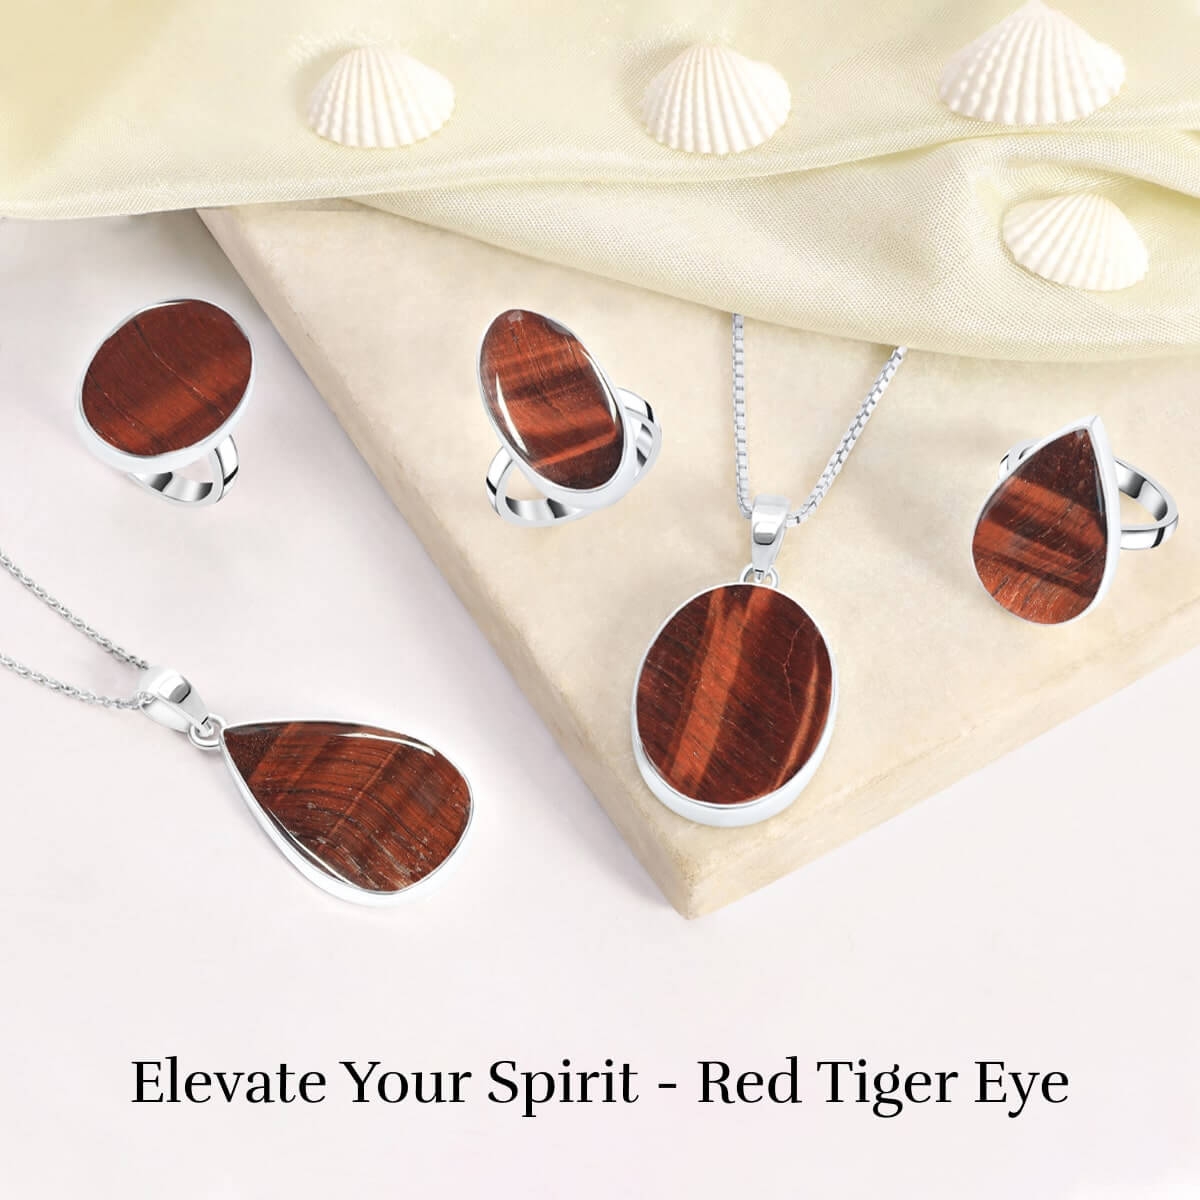 In Which Ways You Can Use Red Tiger Eye Crystal?